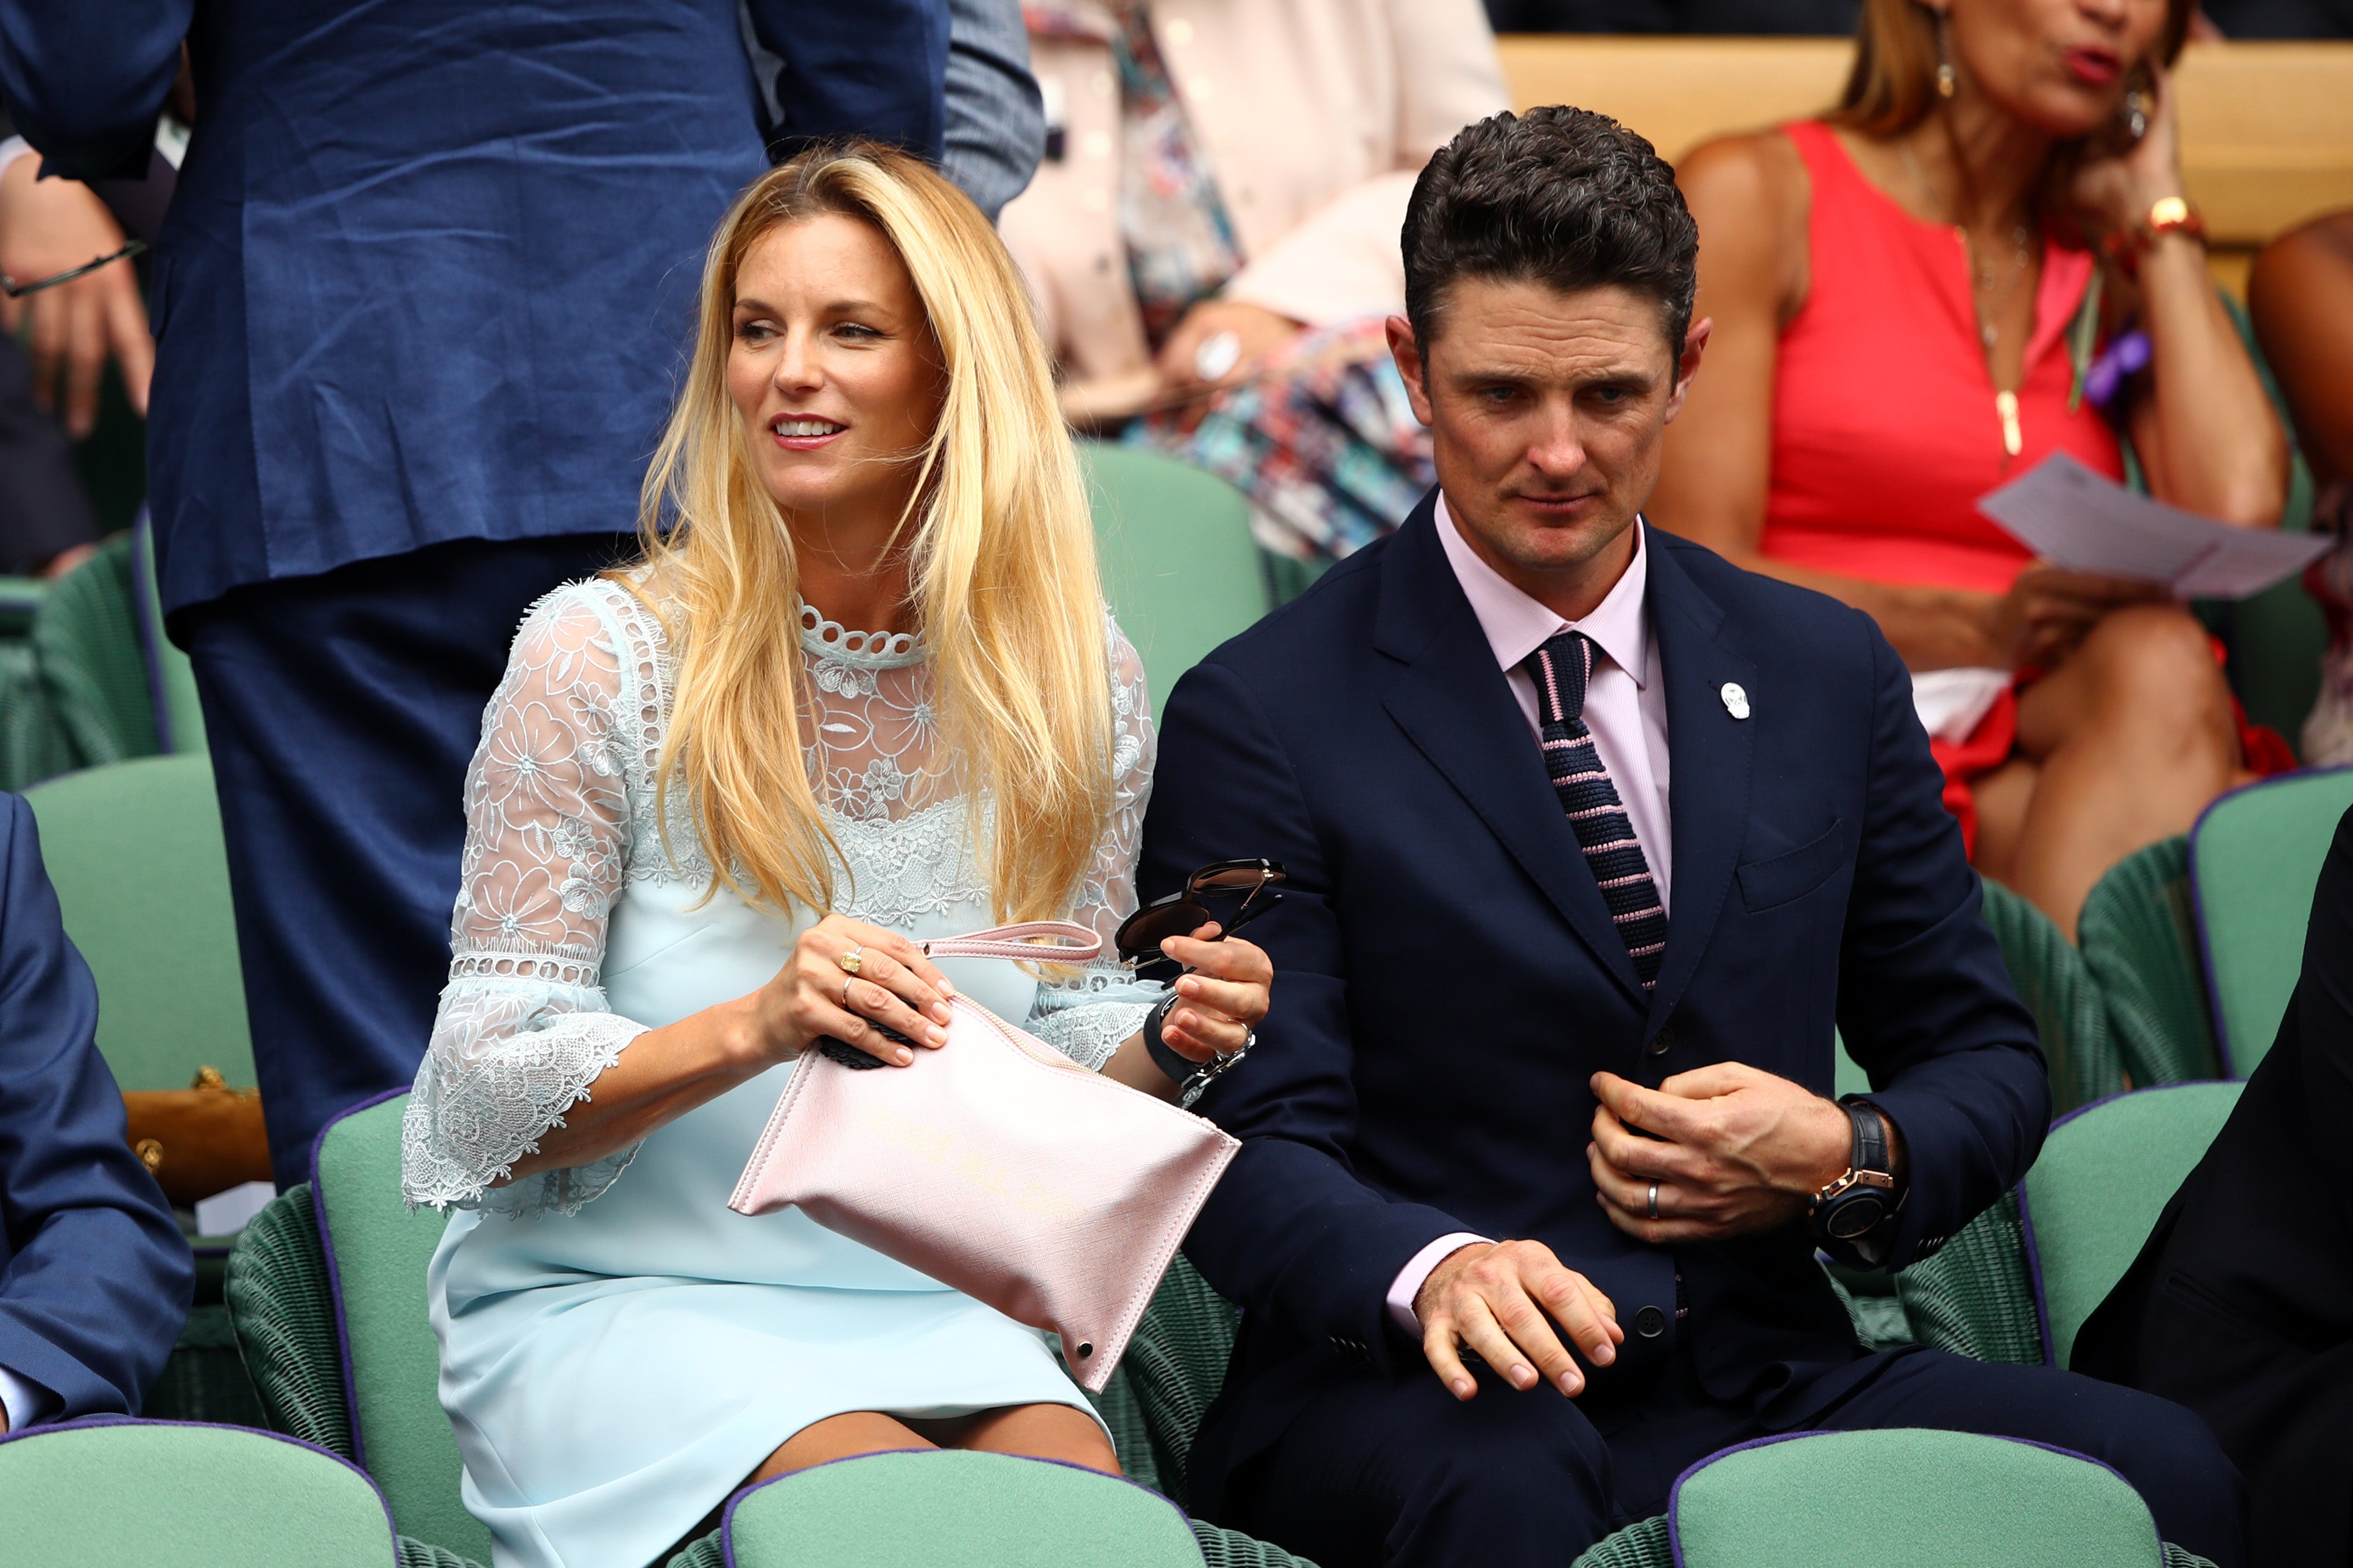 Rose and his wife at Wimbledon in 2017